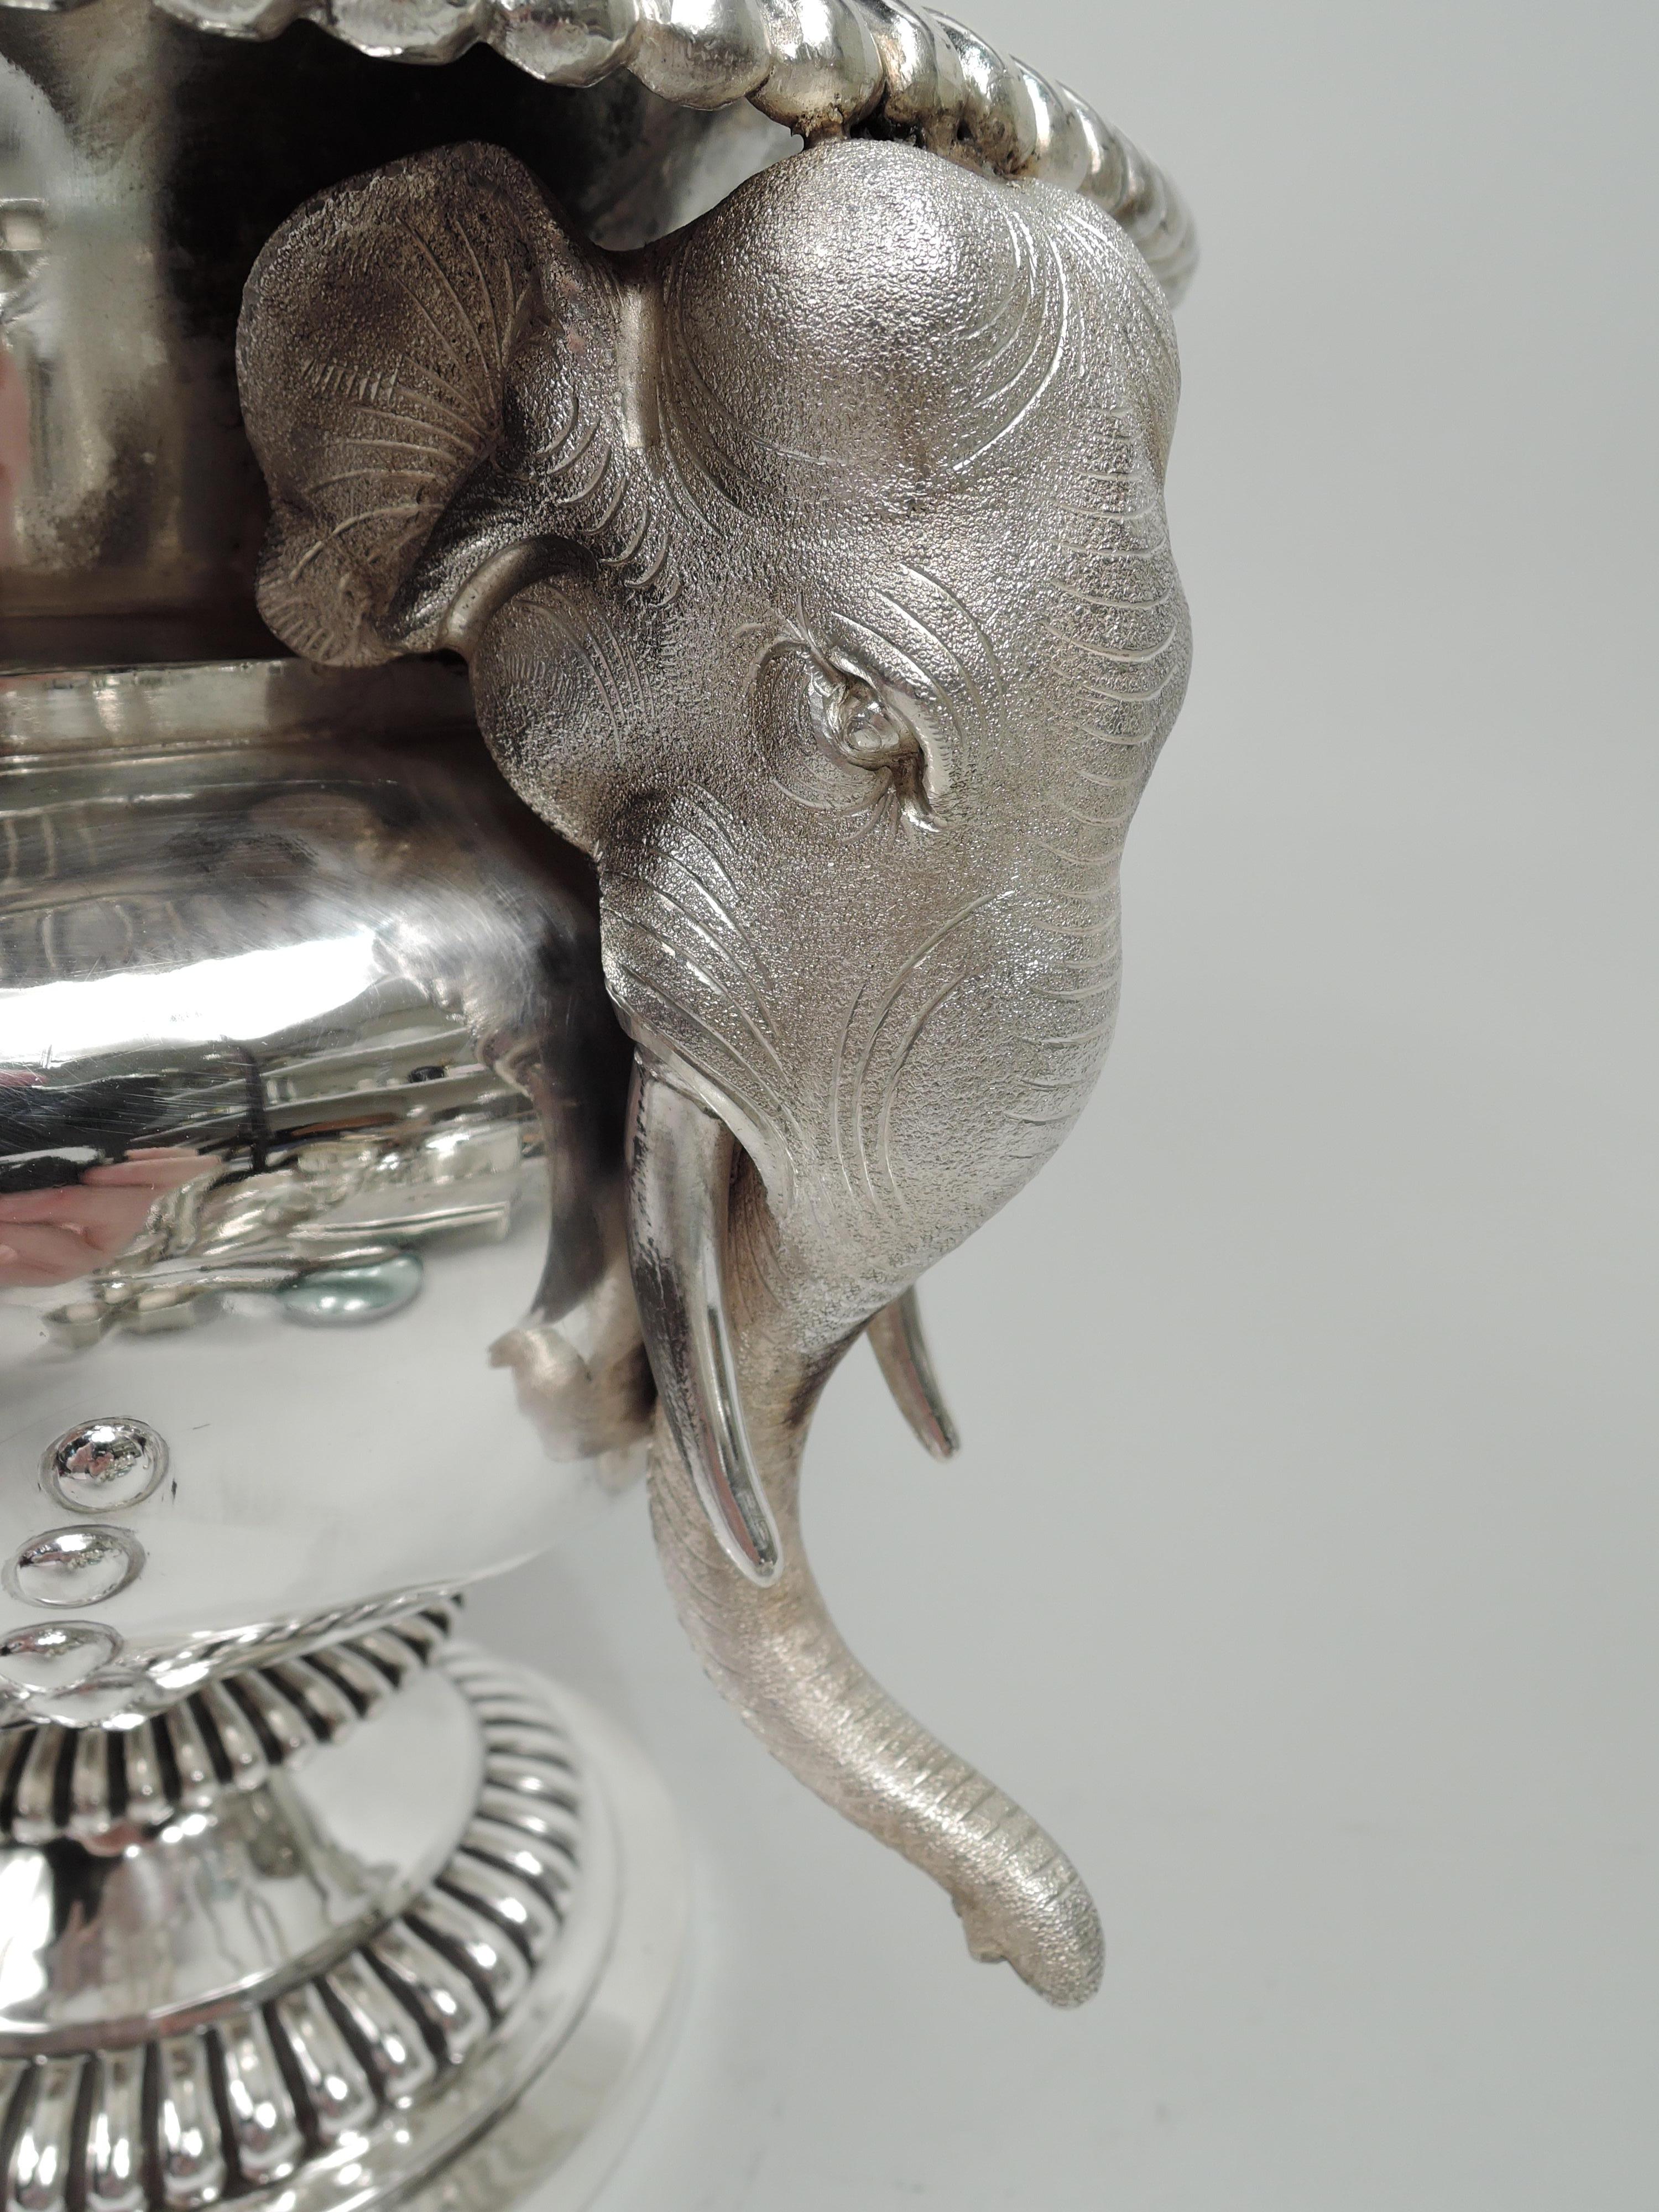 Raj Indian Silver Elephant Wine Cooler Centerpiece with Nawab’s Coat of Arms 1